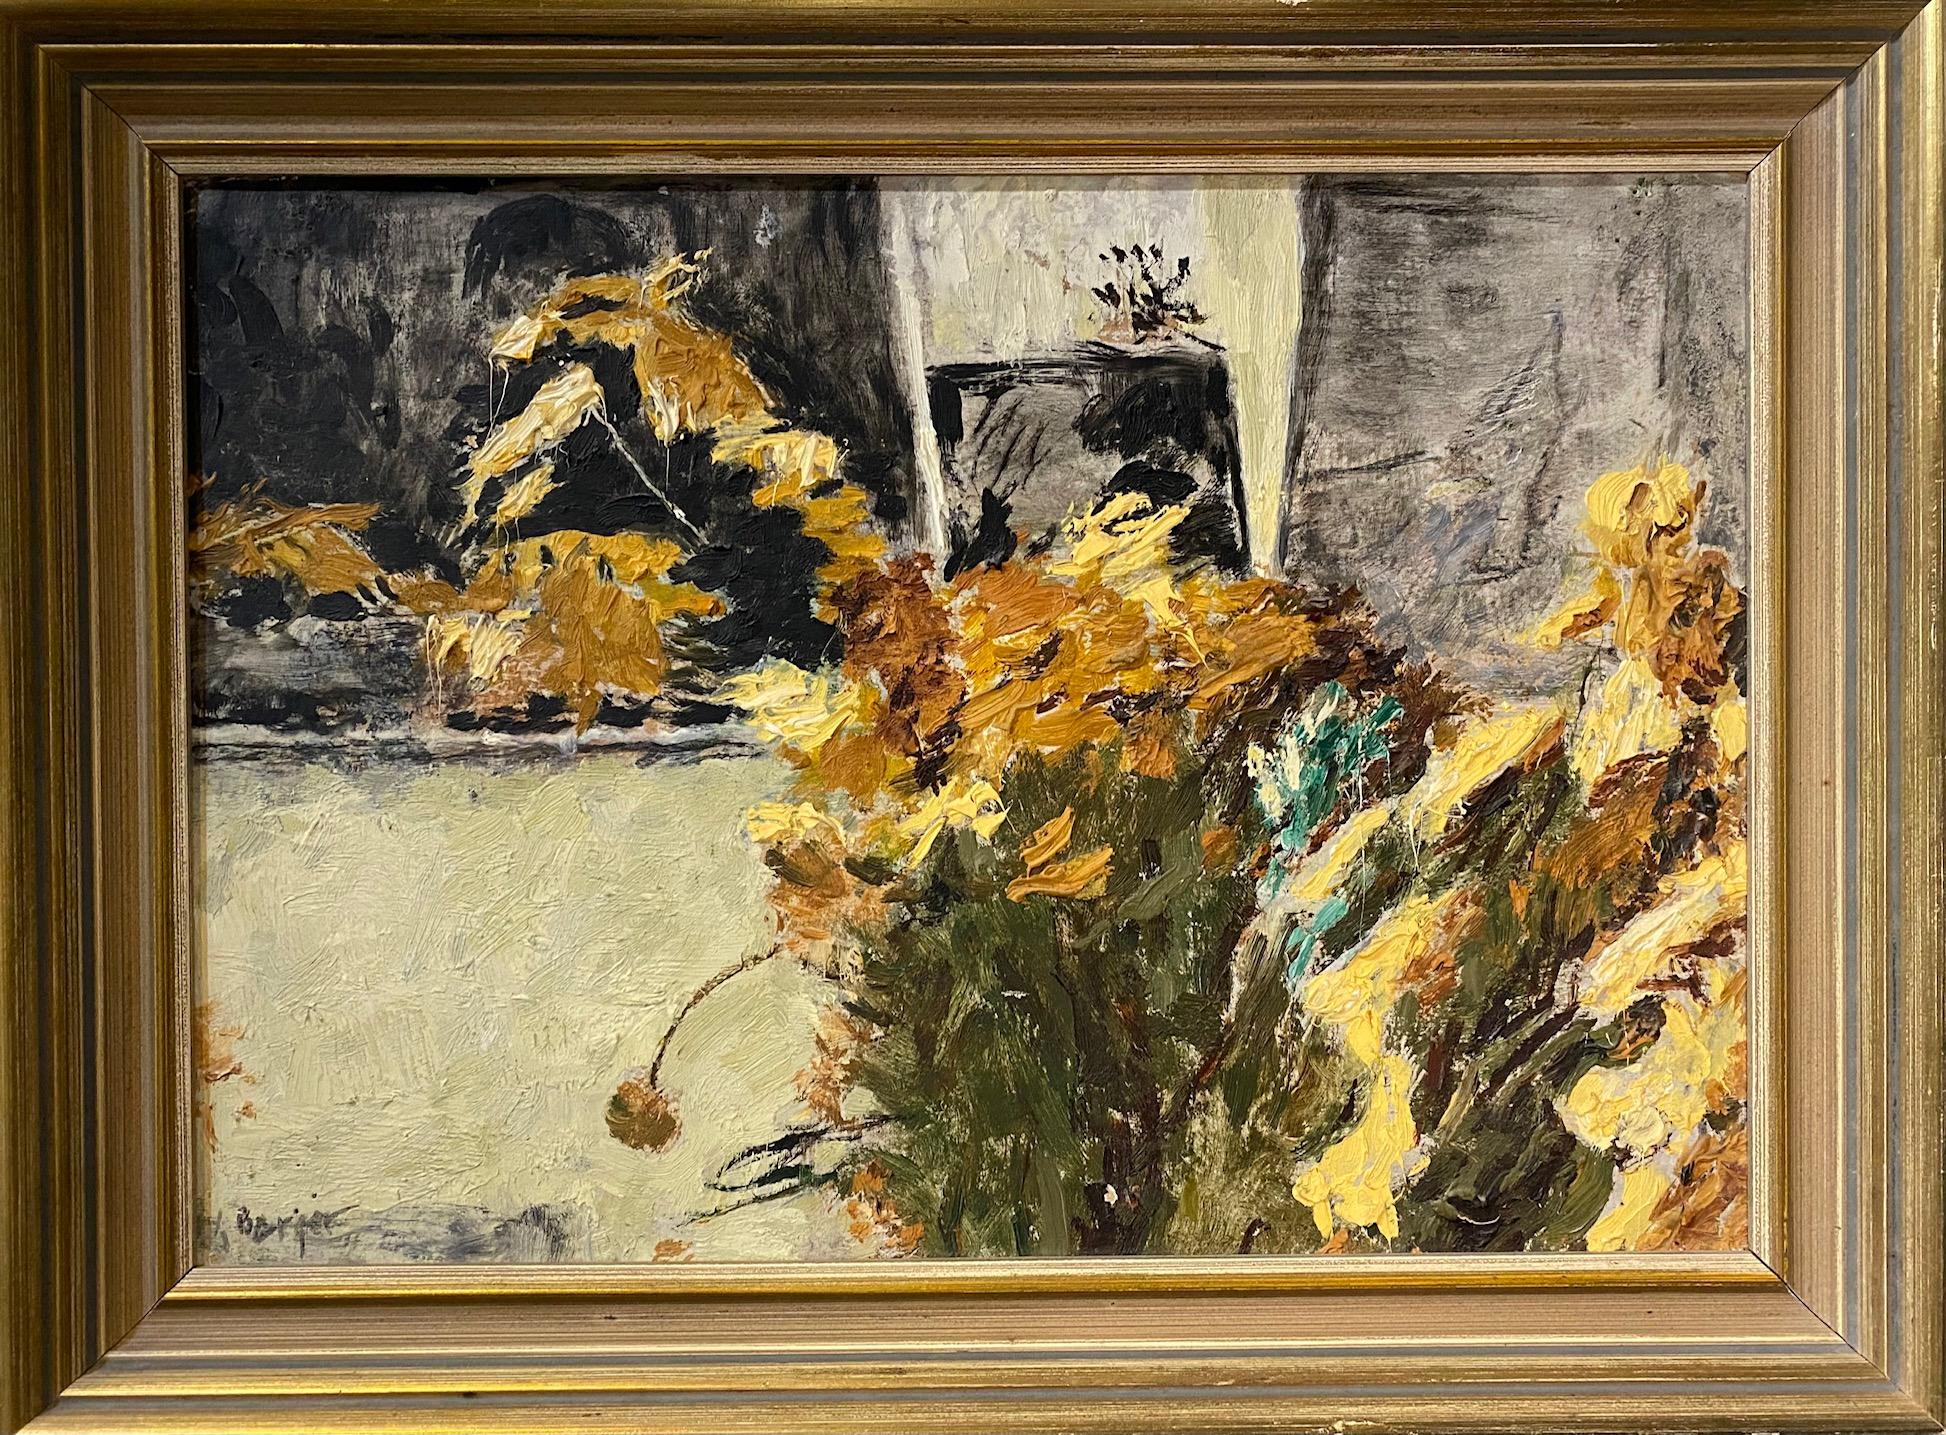 Sunflowers by Hans Berger - Oil on wood 28x40 cm 1